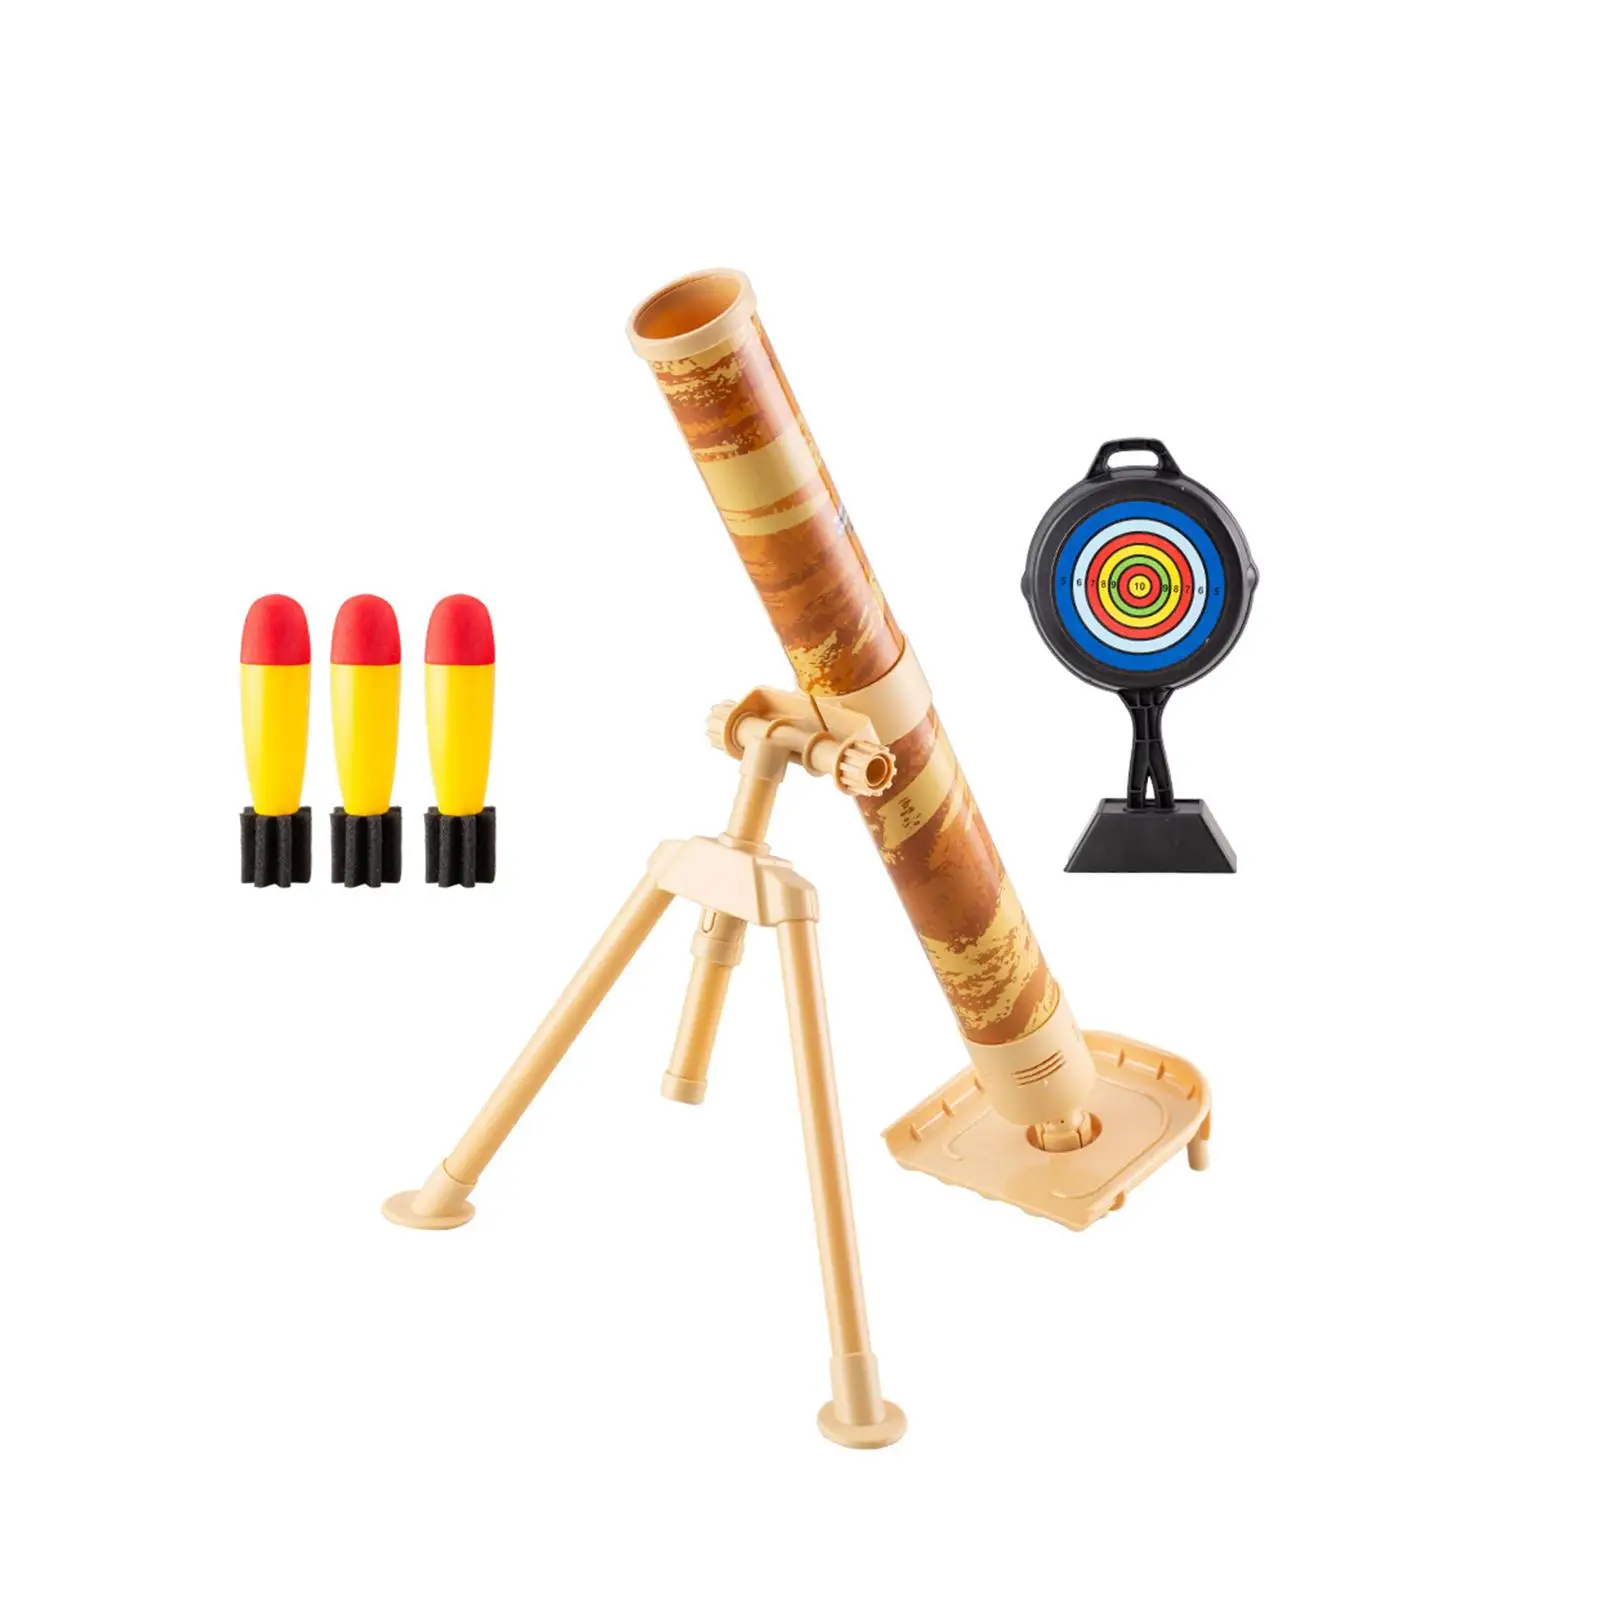 Mortar Launcher Toy Set Professional with Sound Great for Outdoor Game for Boys and Girls Kid Festival Present